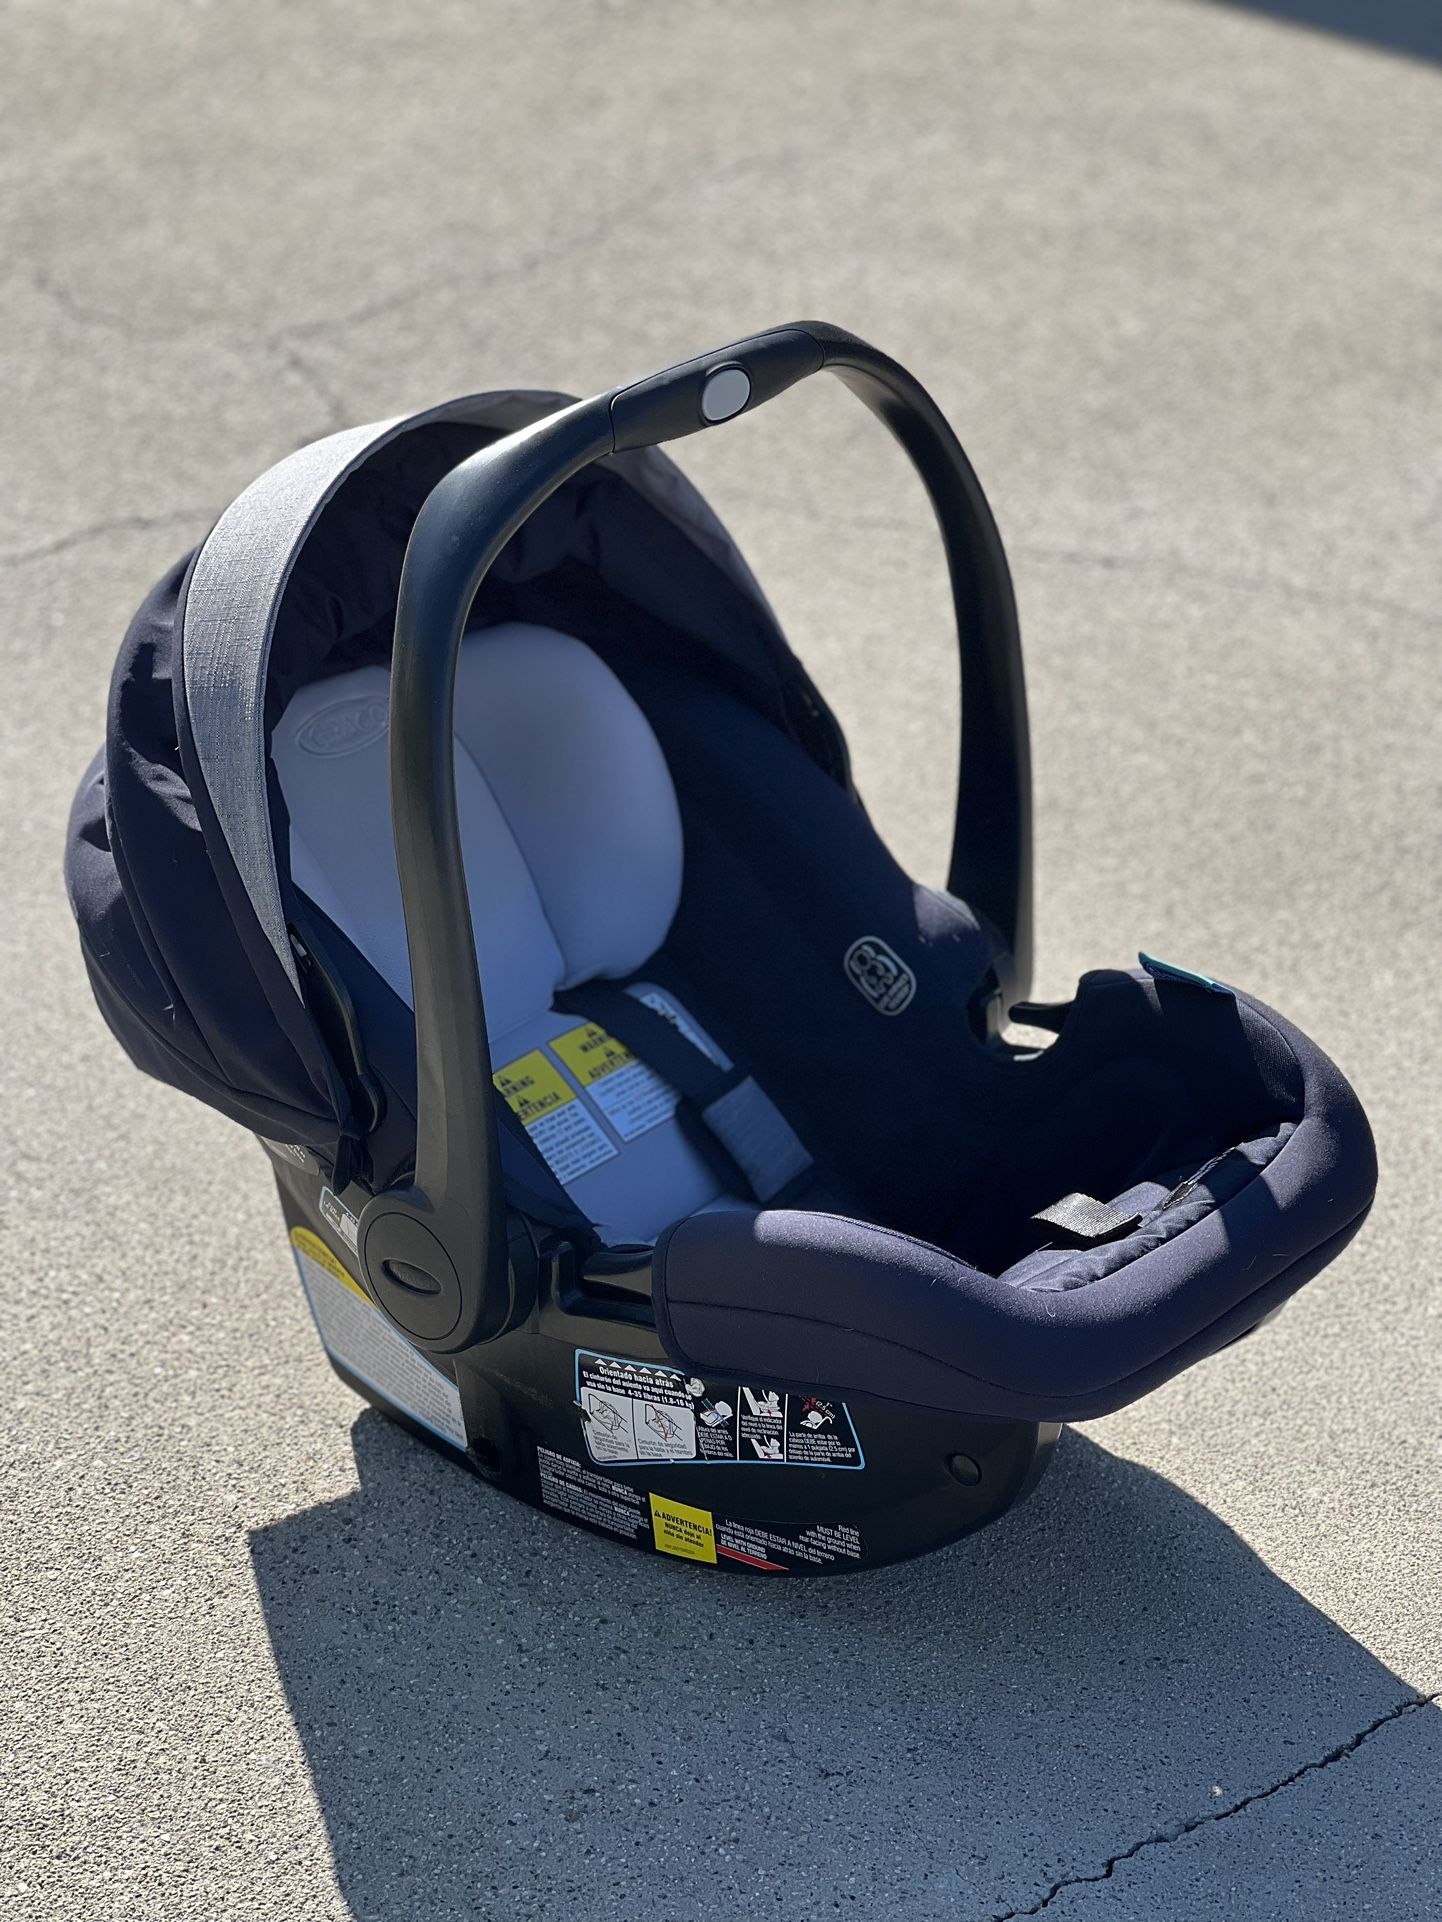 Graco Car Seats with Bases